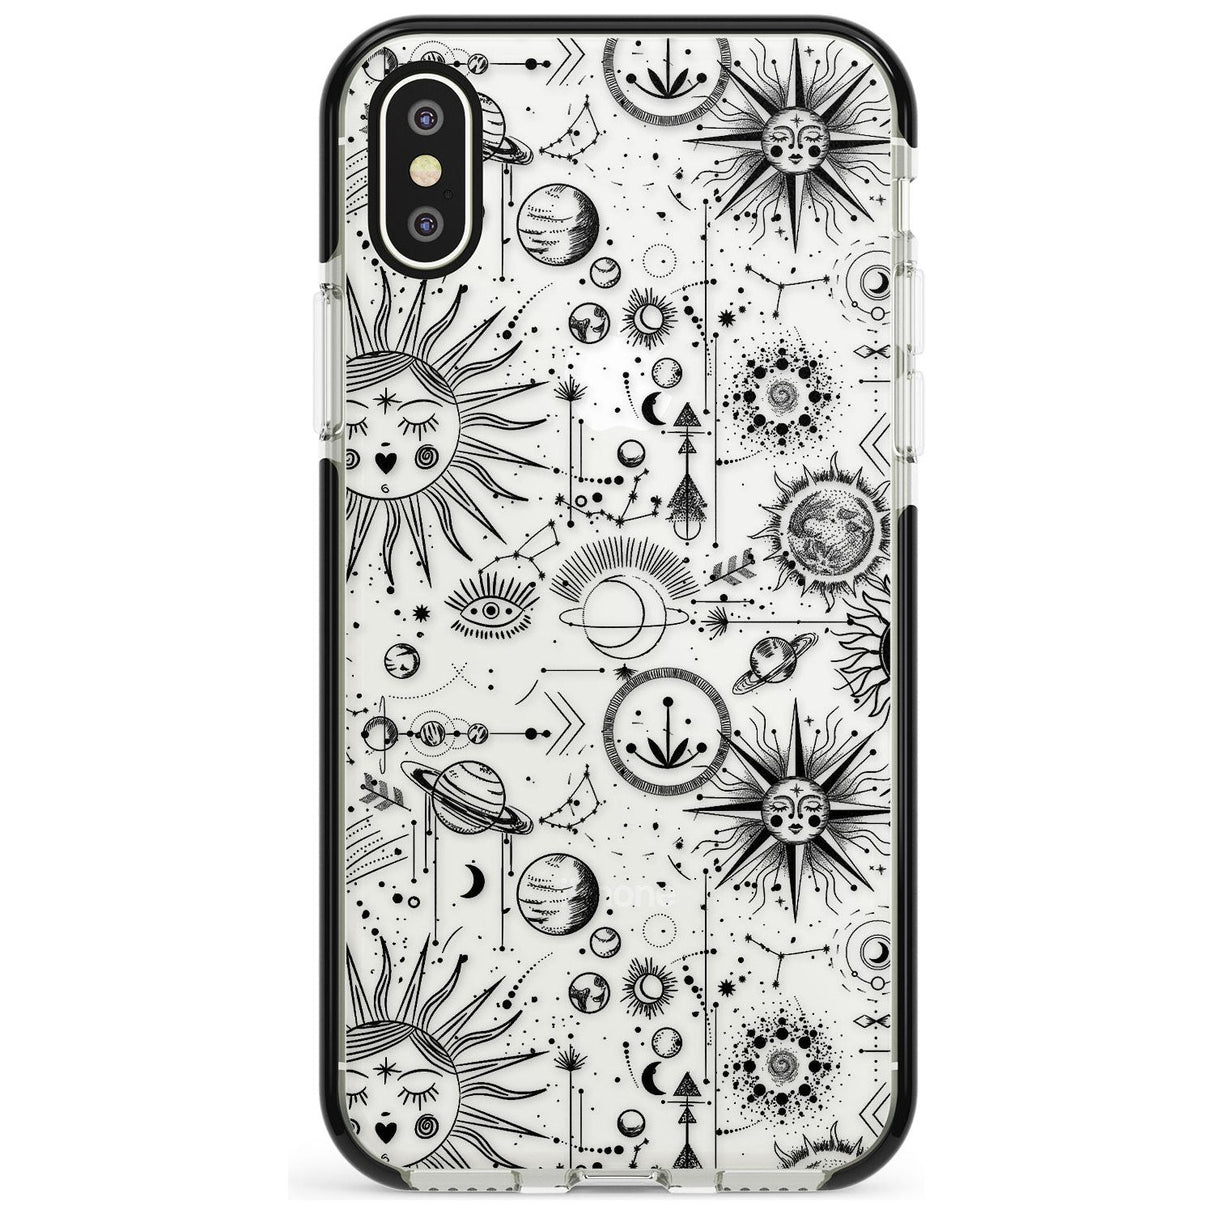 Suns & Planets Vintage Astrological Black Impact Phone Case for iPhone X XS Max XR